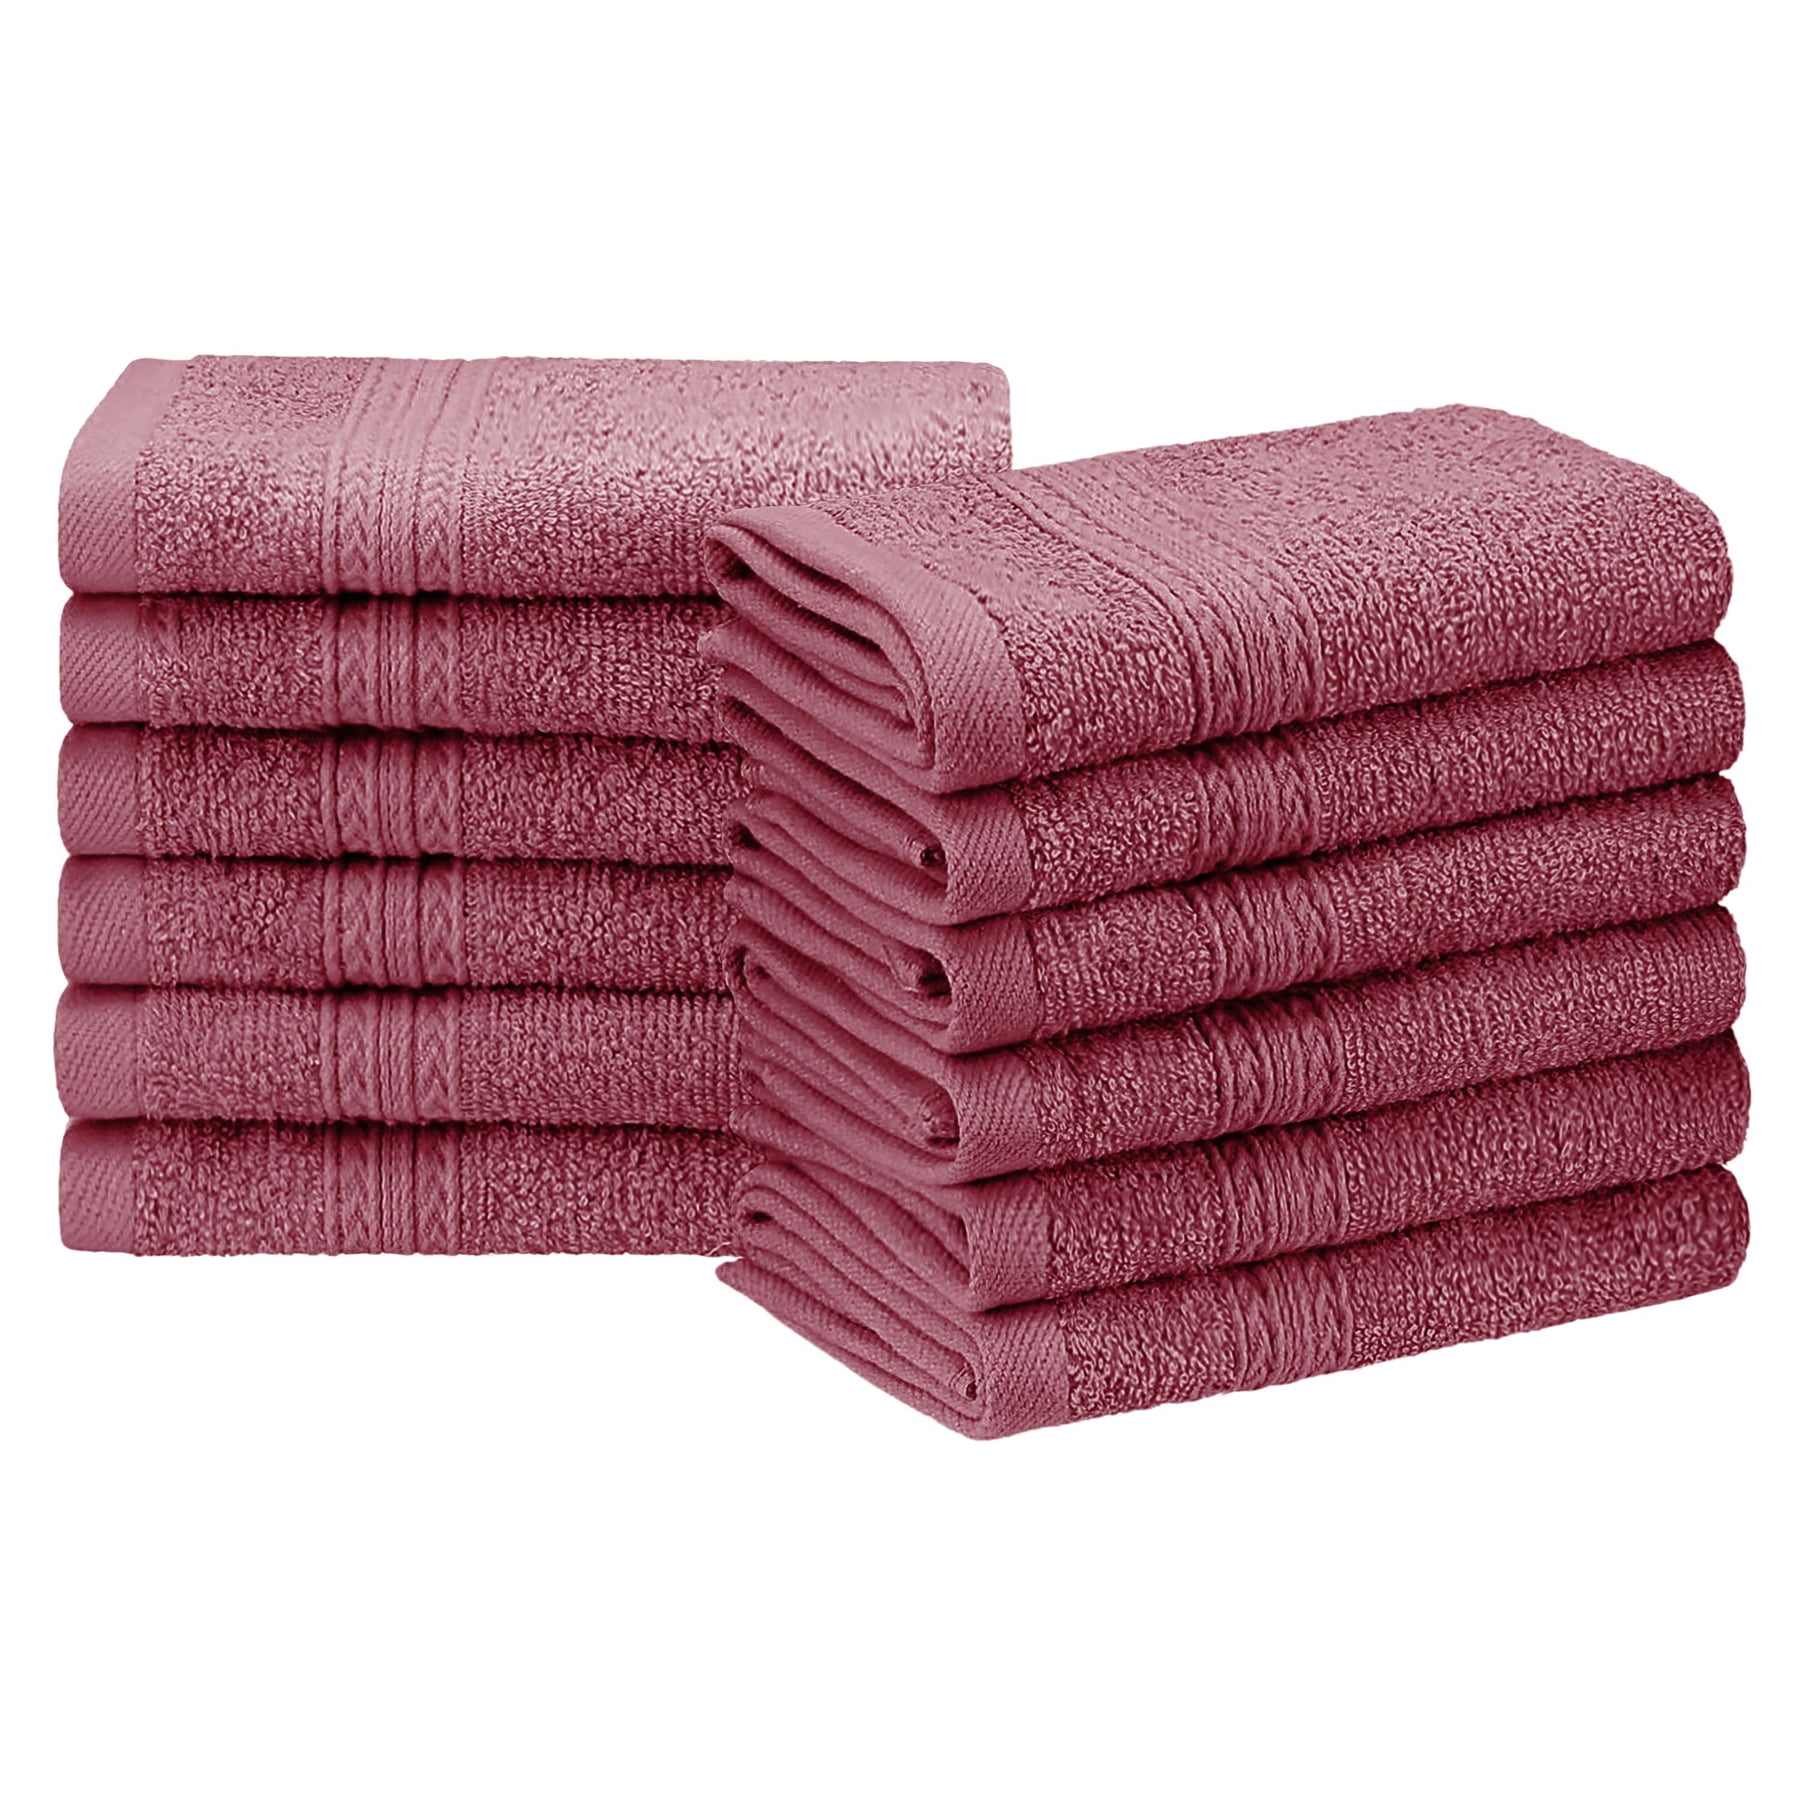 Luxury Hotel Collection Cotton-Eco Gray Bath Towels - Dobby Border - Set of  4 - Bed Bath & Beyond - 19671426